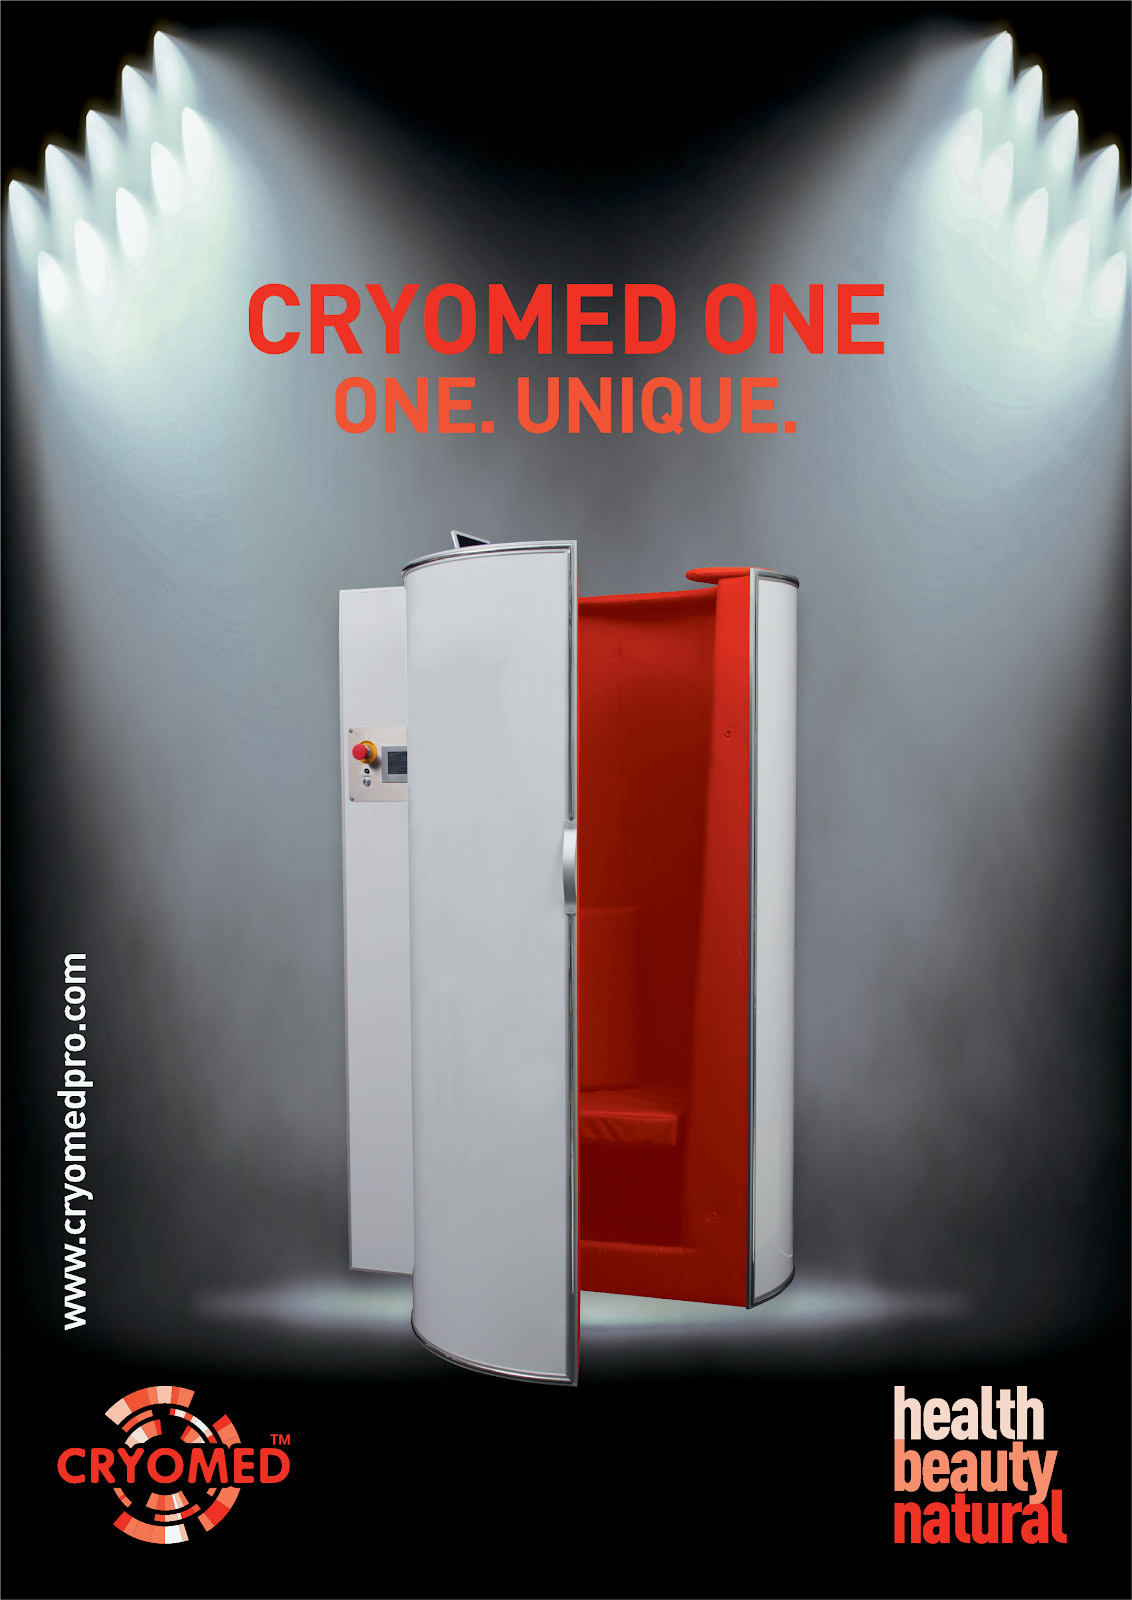 Plakat Cryomed A0 - 20 euro